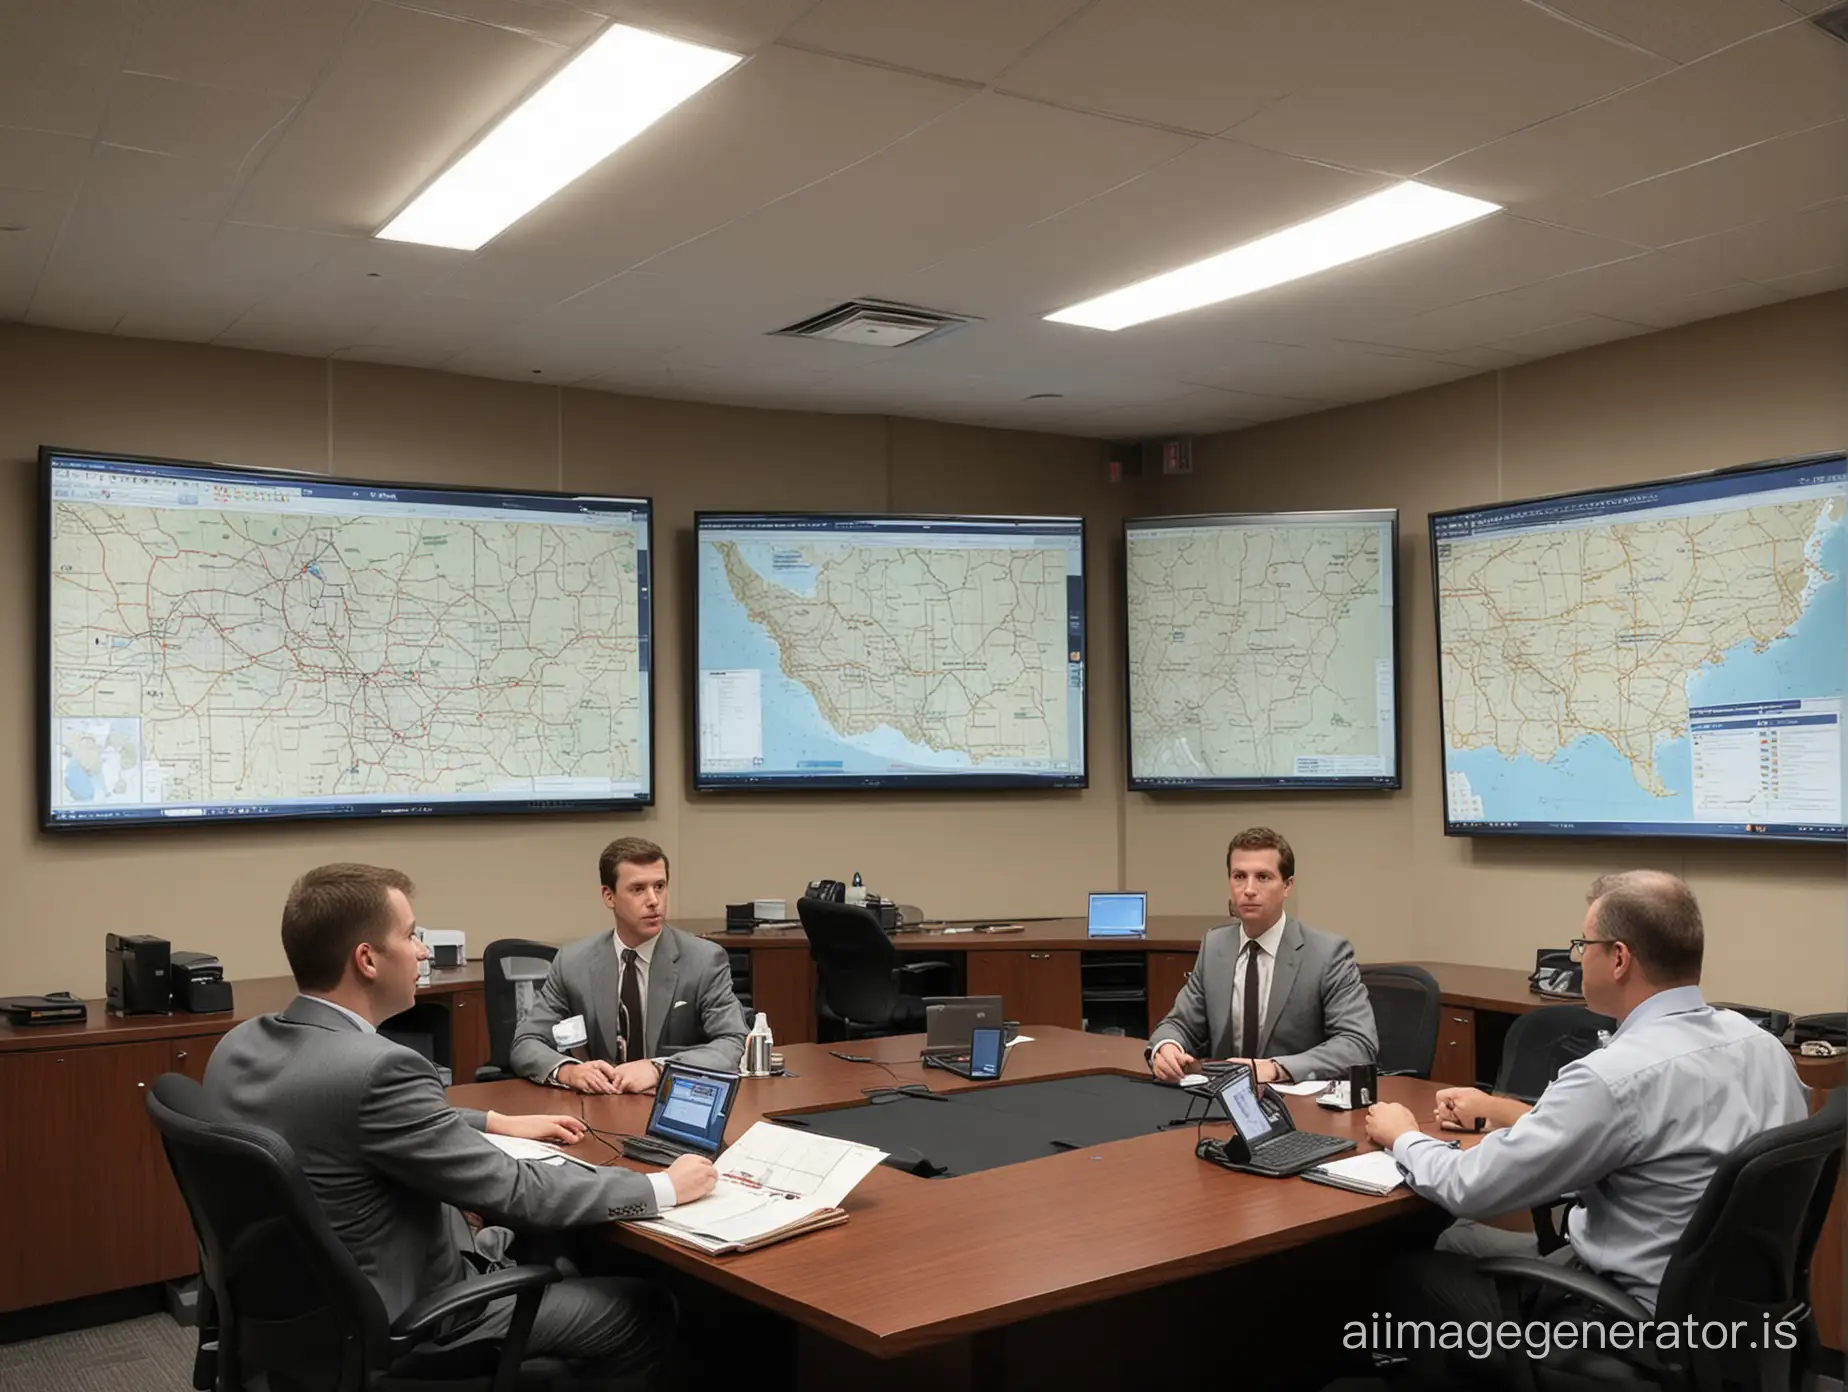 Center for Strategic Decision Support. Six flat monitors hang on the walls, displaying maps. In the center of the room is a large table. Four people in suits sit at the table.